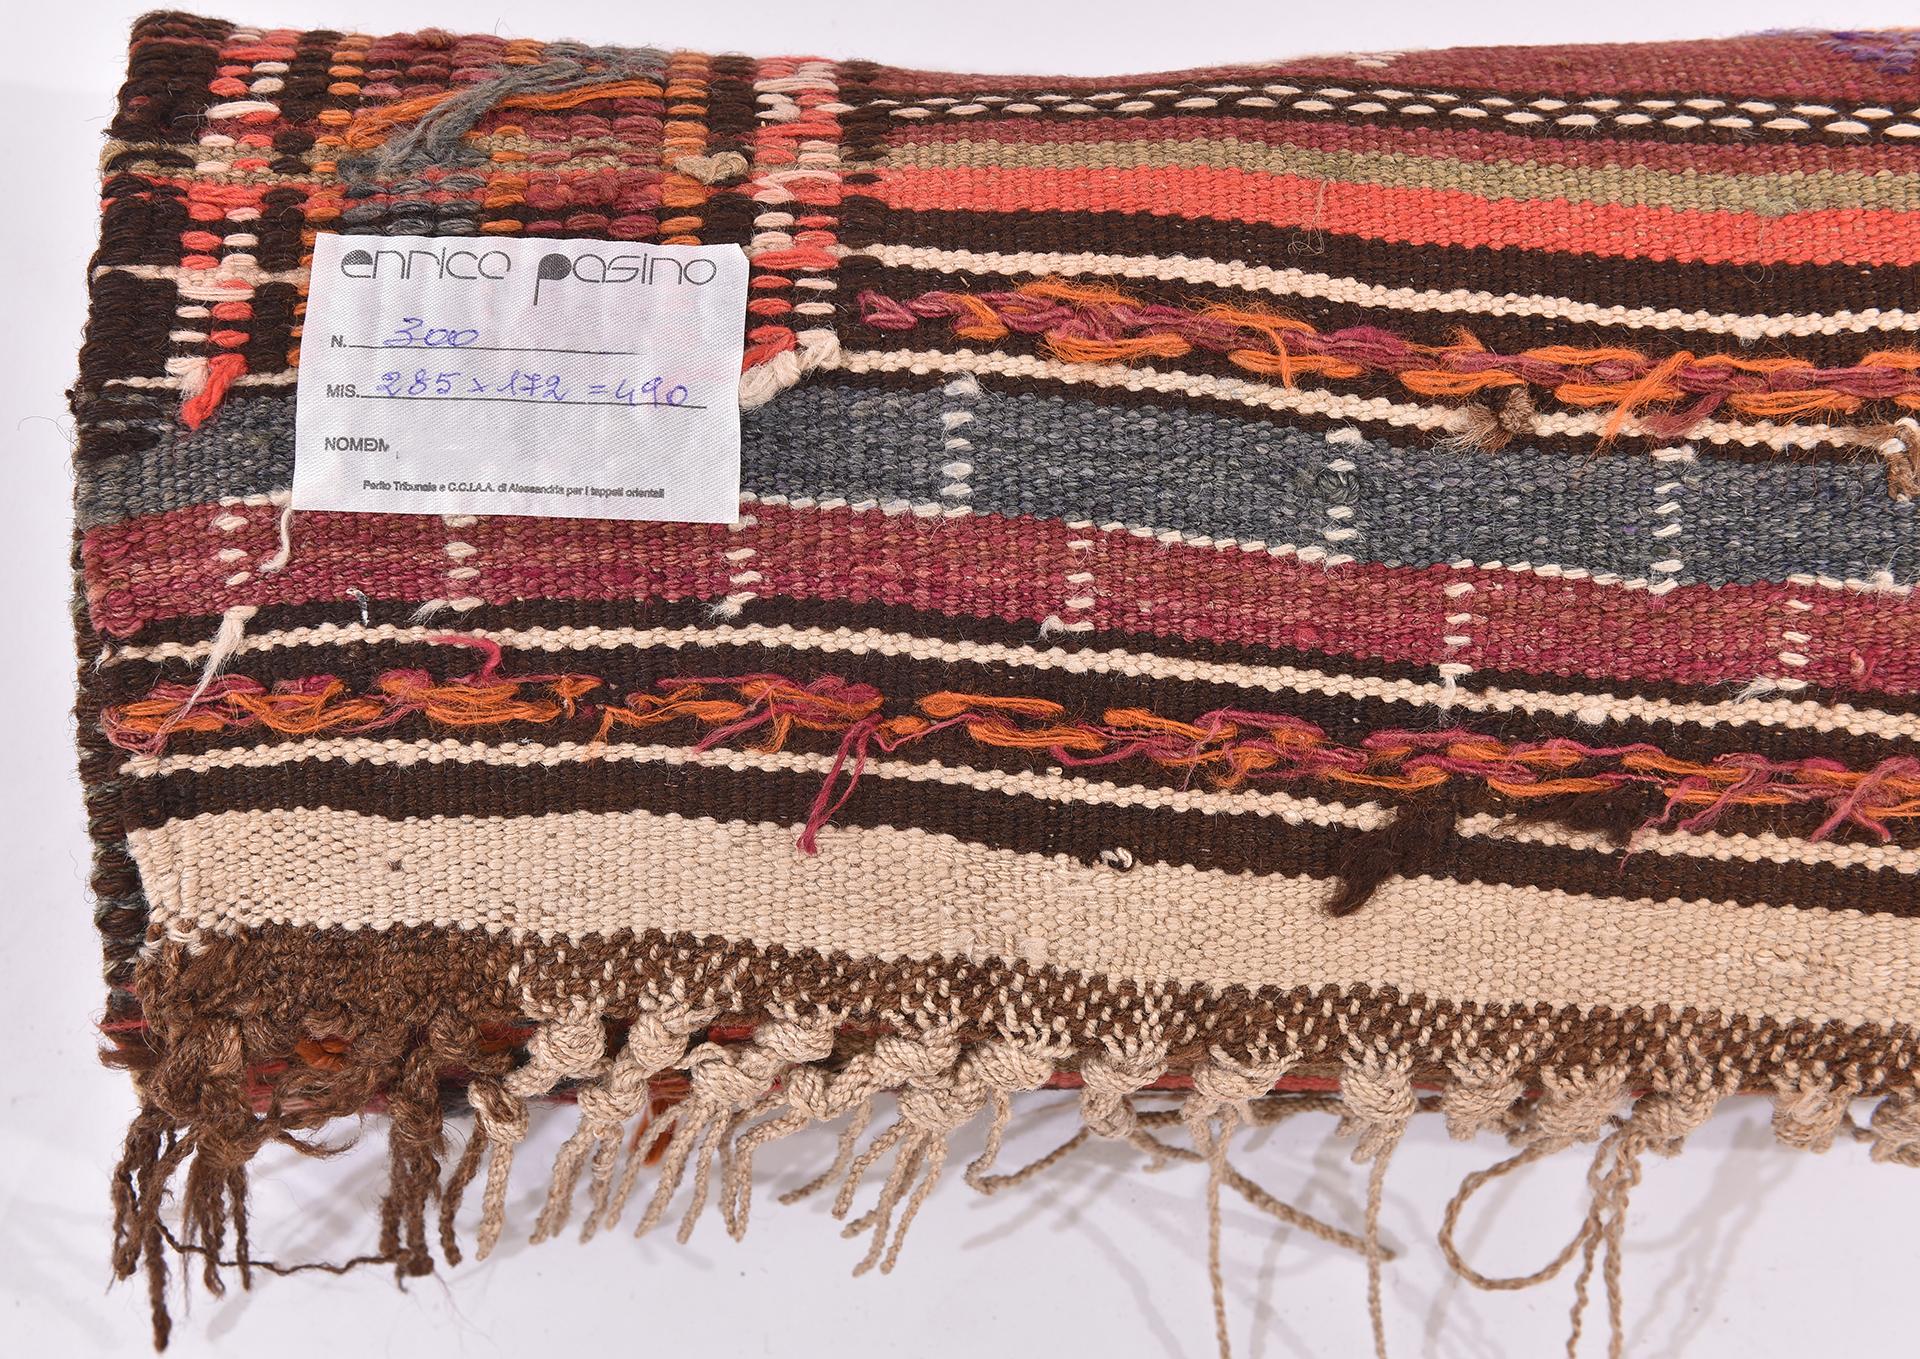 nr. 300 - Pleasant kilim with pastel pink, camel, gray and brown colors. Border entirely embroidered with frets.
May be it was a sofa in a nomadic tent.
now with an interesting price for closing activities.